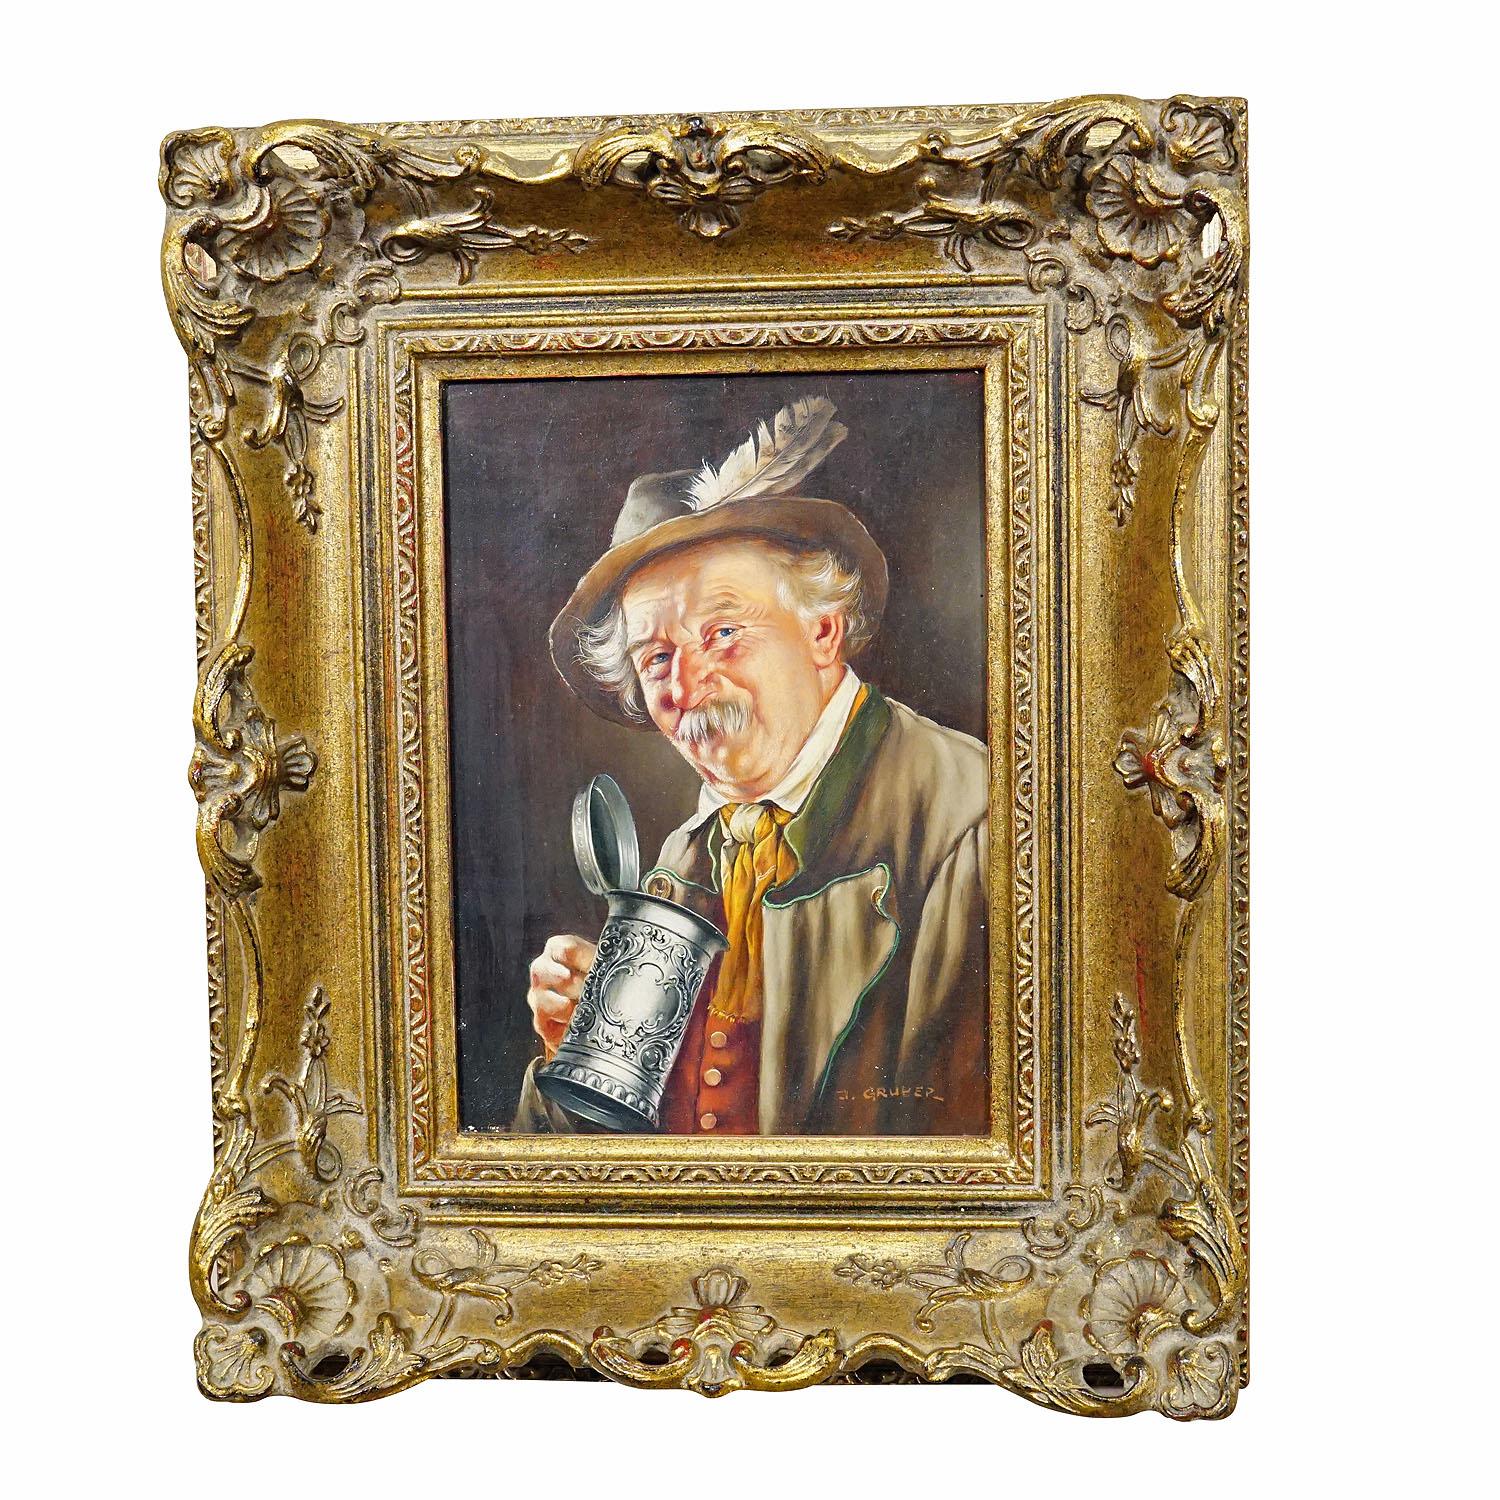 J. Gruber - Portrait of a Bavarian Folksy Man with Beer Mug, Oil on Wood

An colorful oil painting depicting a beer drinking folksy Bavarian man in his sunday robe. Painted on wood with pastel colors around 1950s. Framed with antique wooden gilded